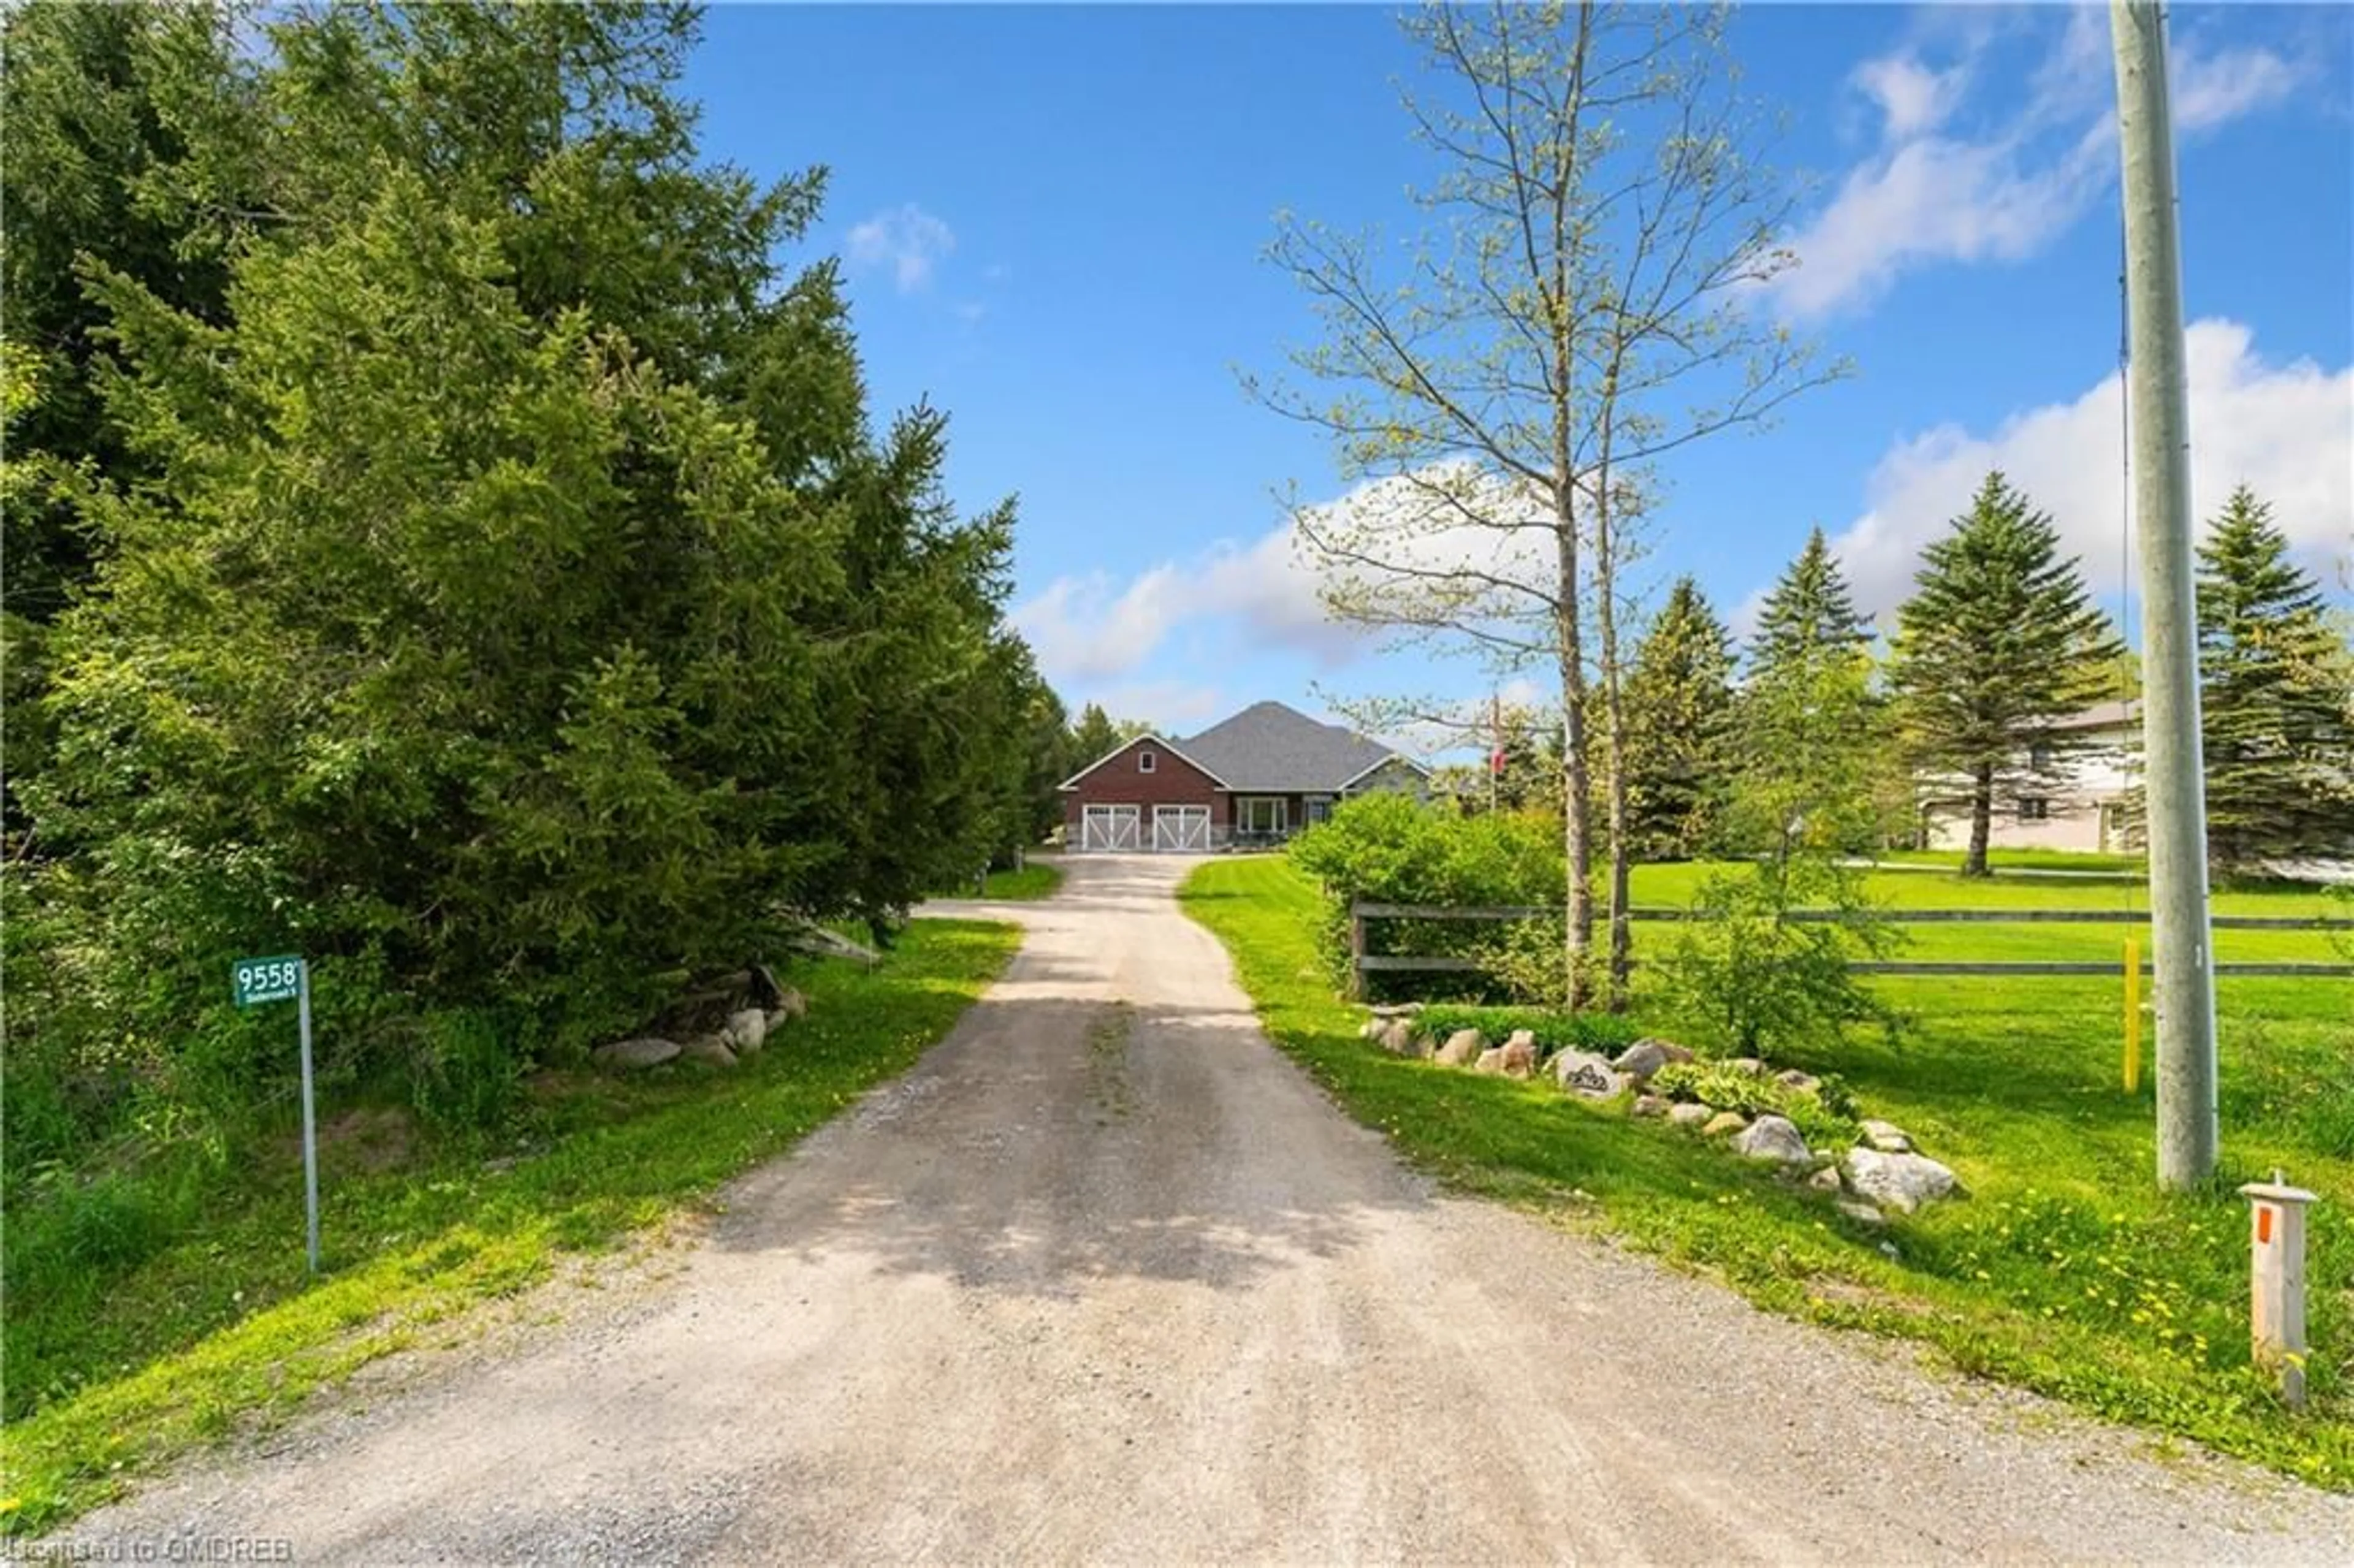 Cottage for 9558 5 Side Road, Erin Ontario N0B 1T0